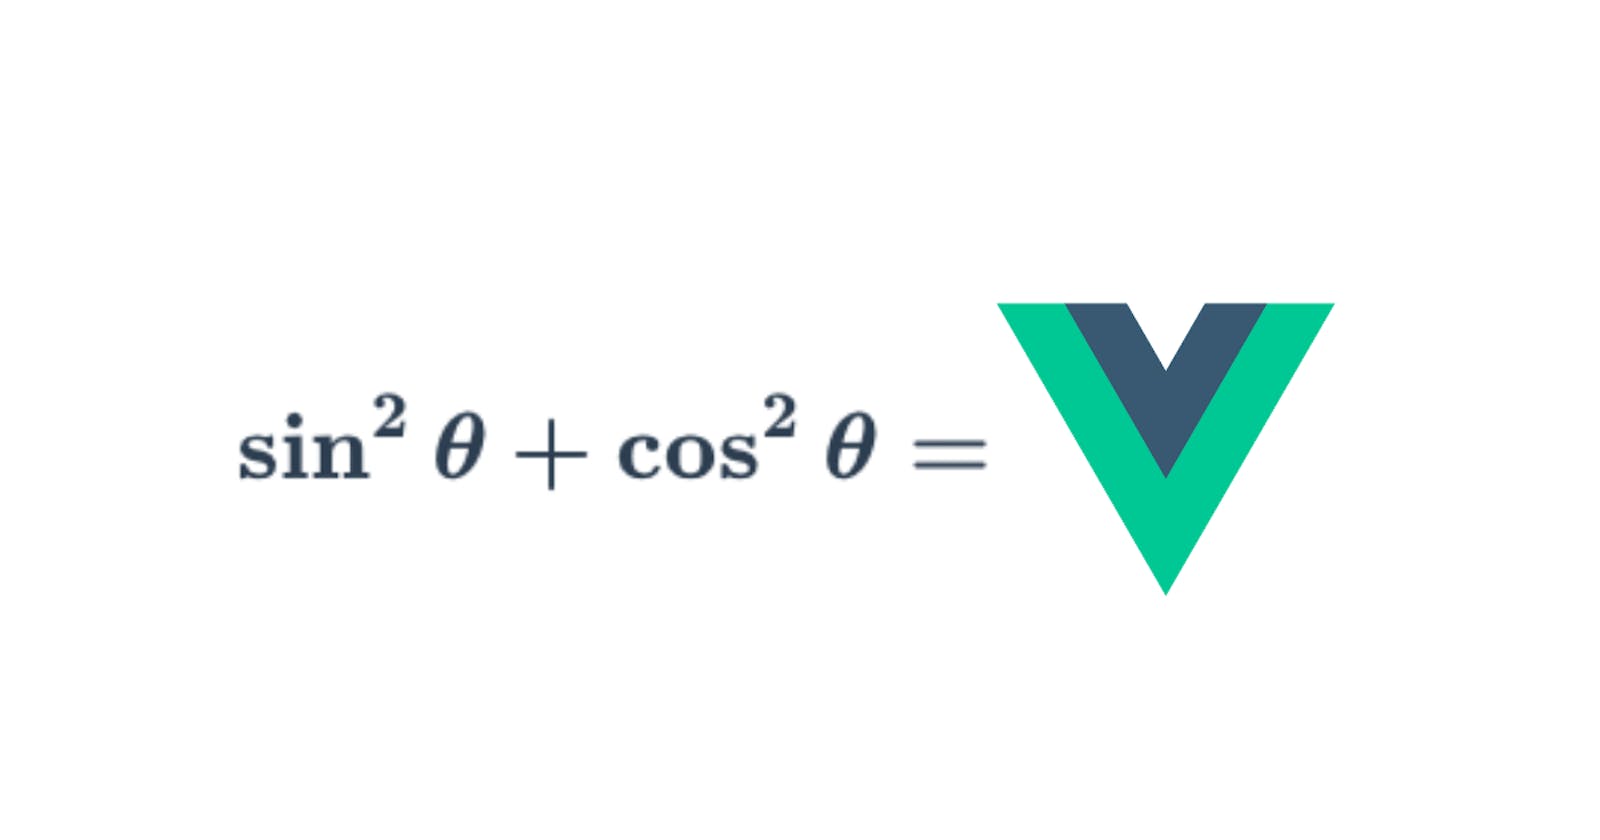 How to Allow Editing of Mathematical equations in Vue.js?